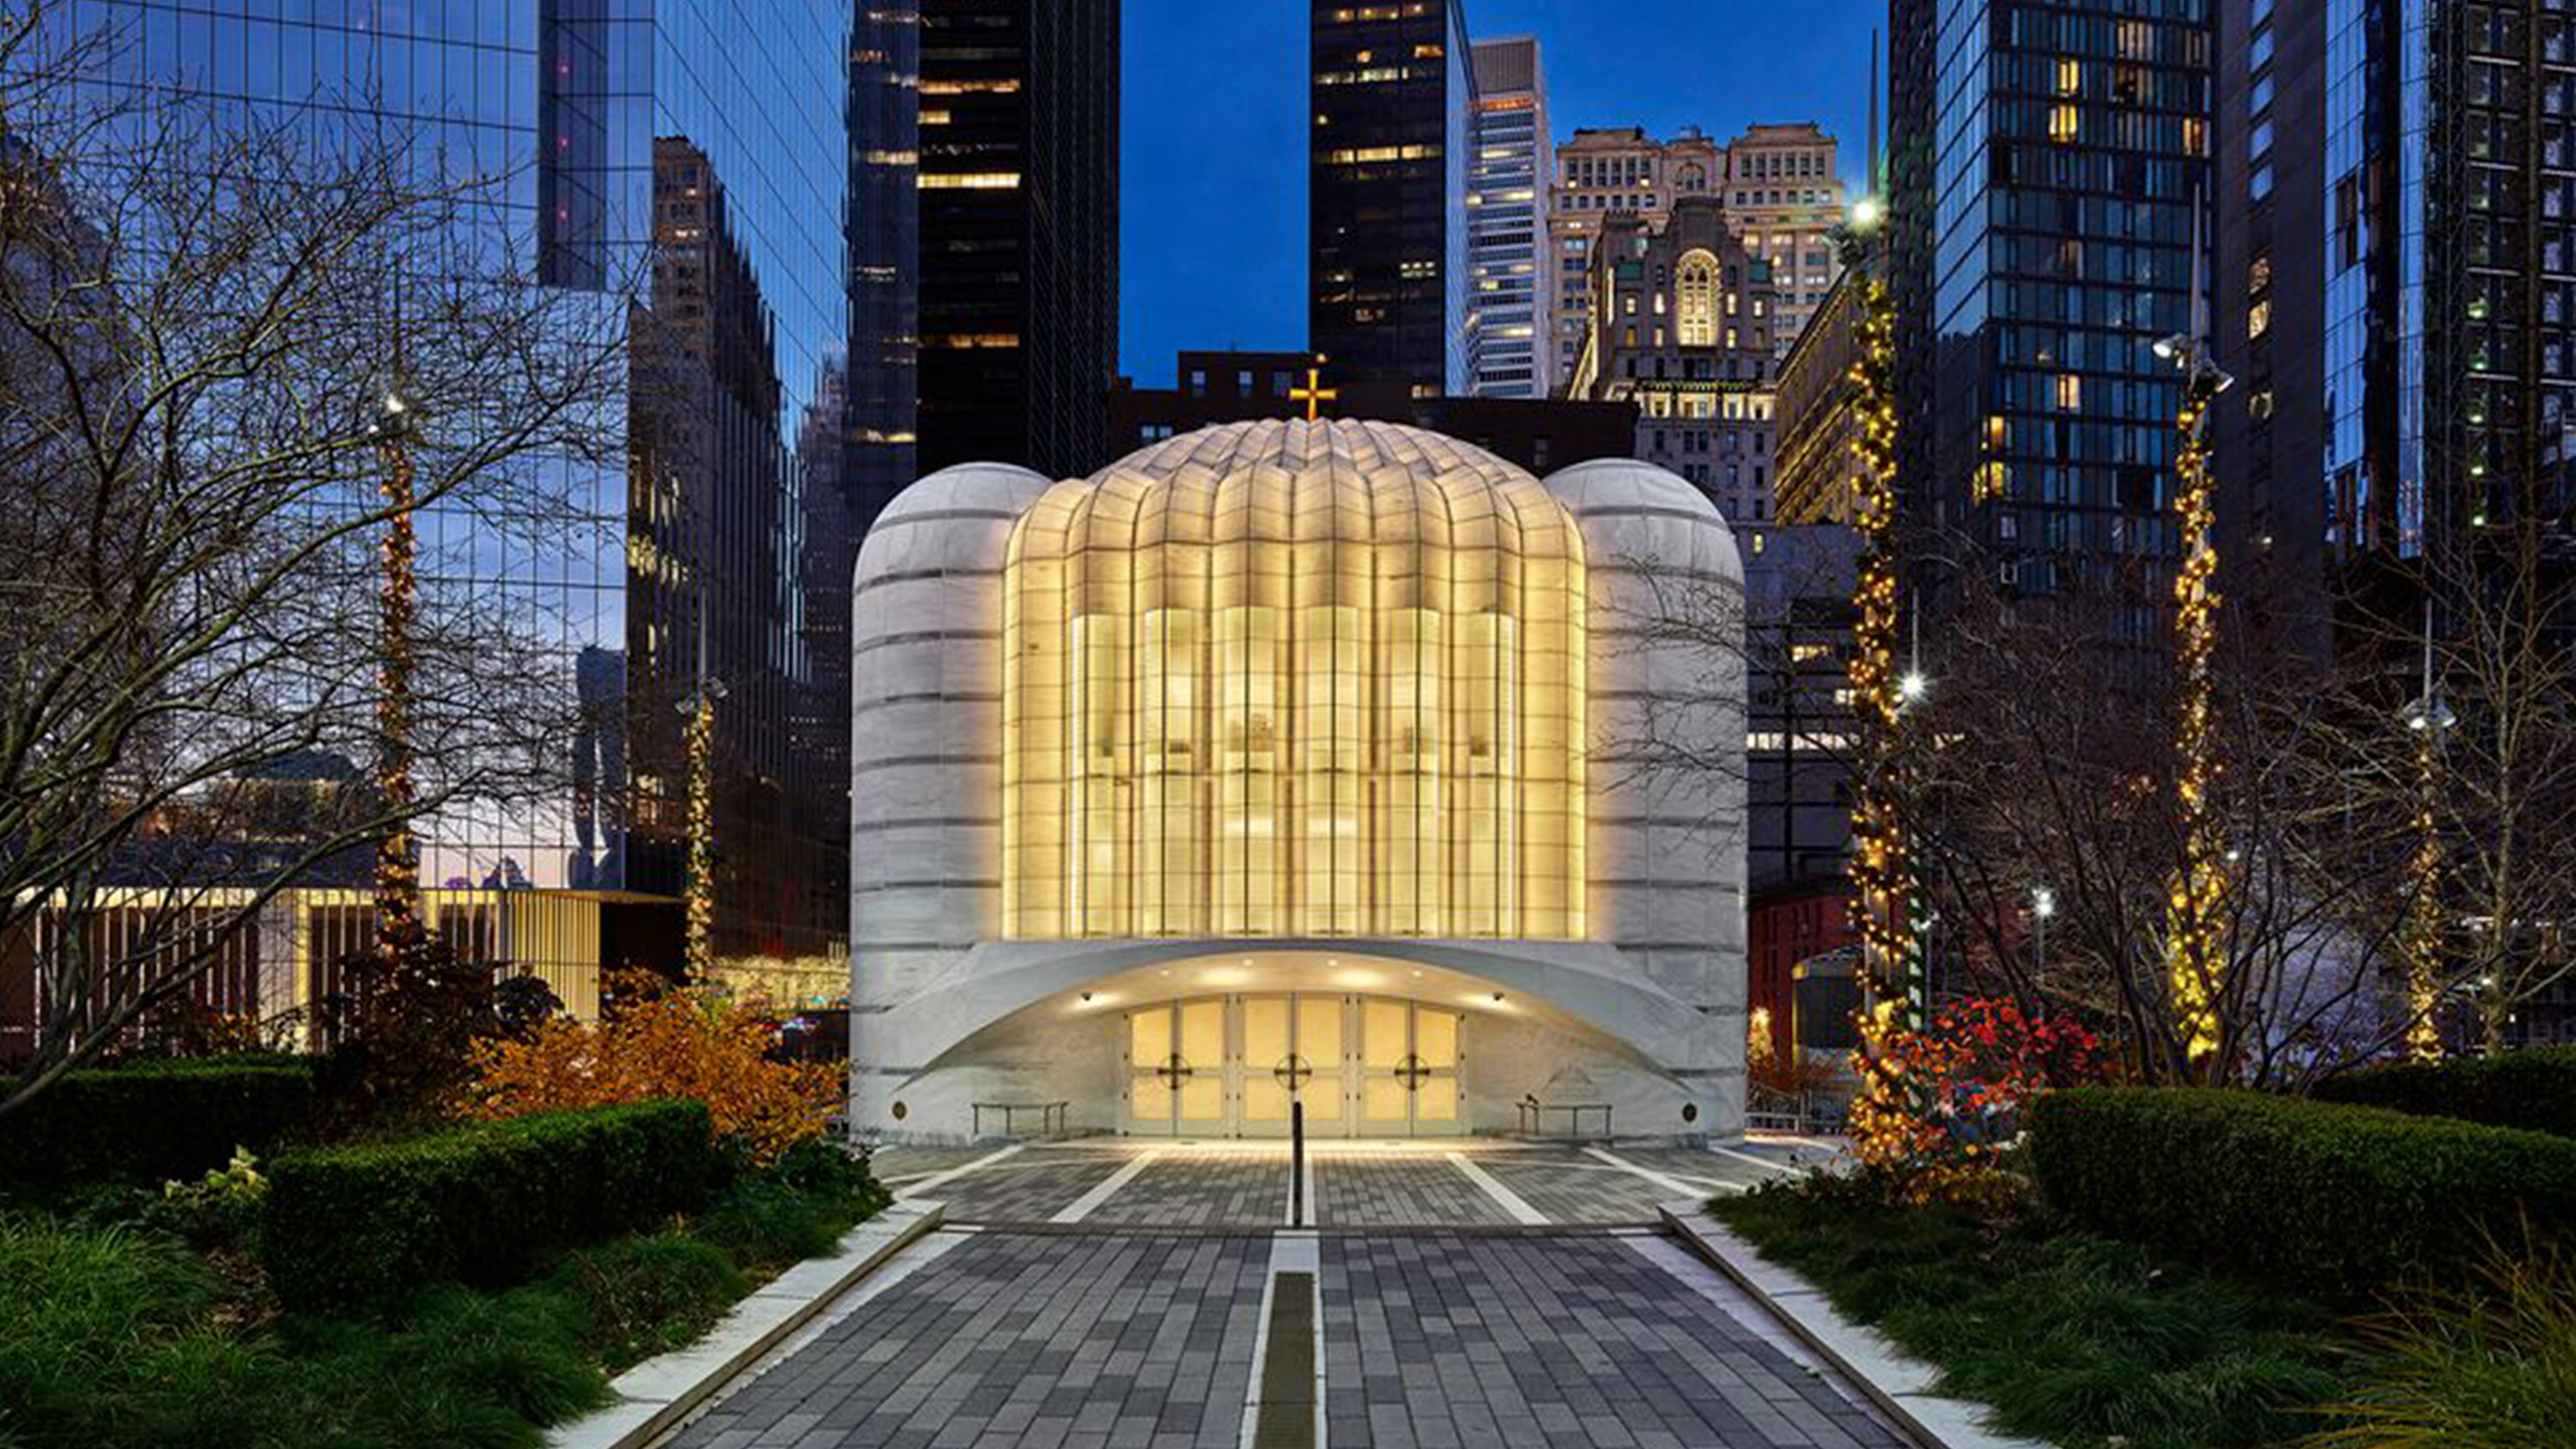  Reopening of the new St. Nicholas Church in New York, by Calatrava